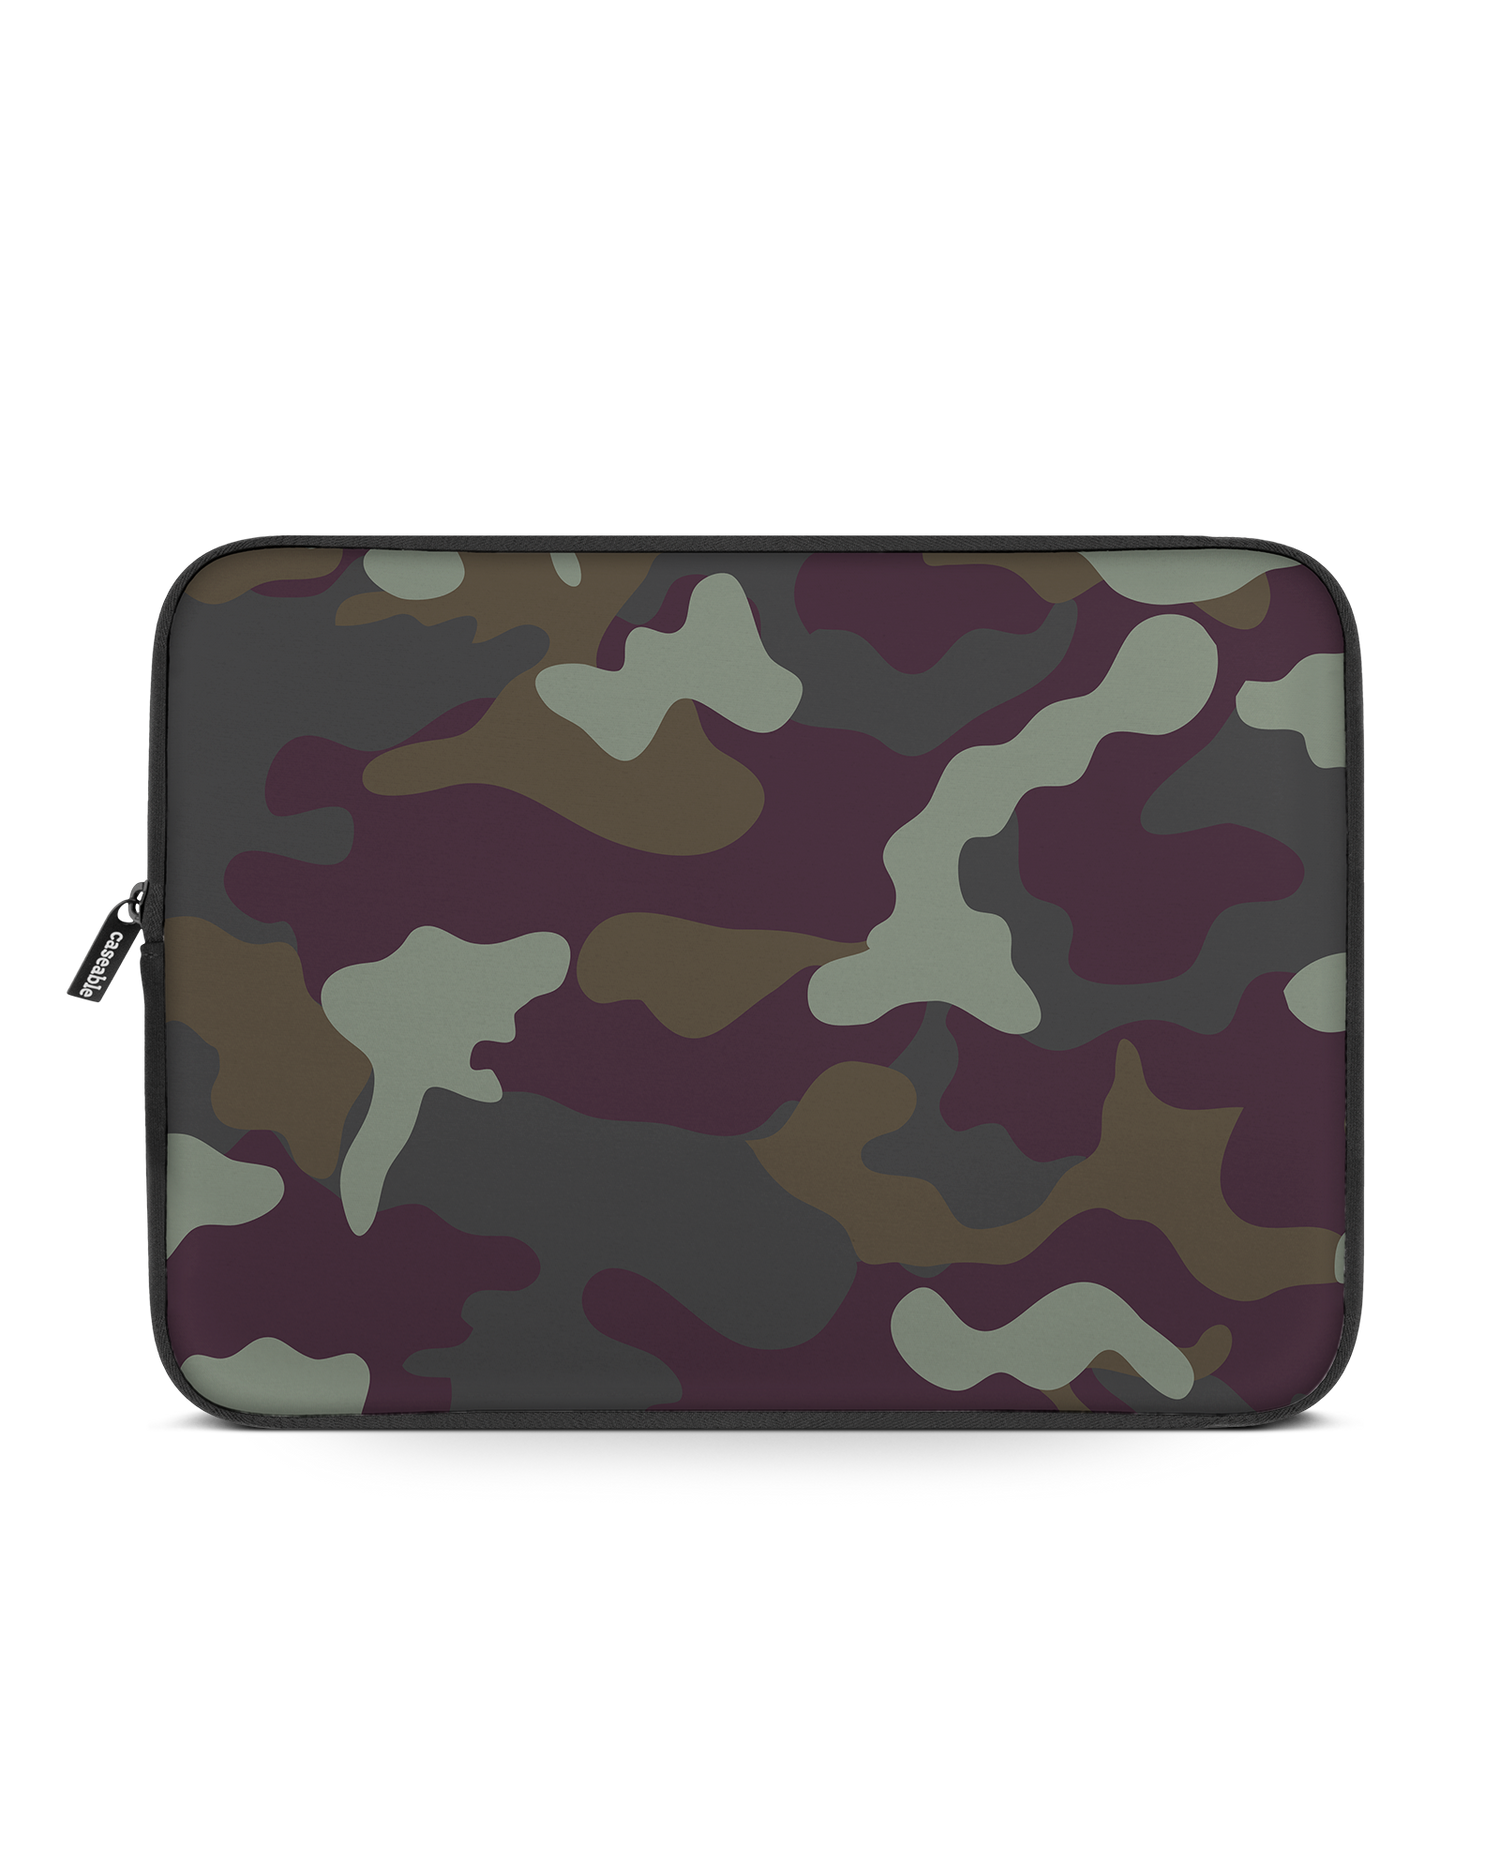 Night Camo Laptop Case 15 inch: Front View